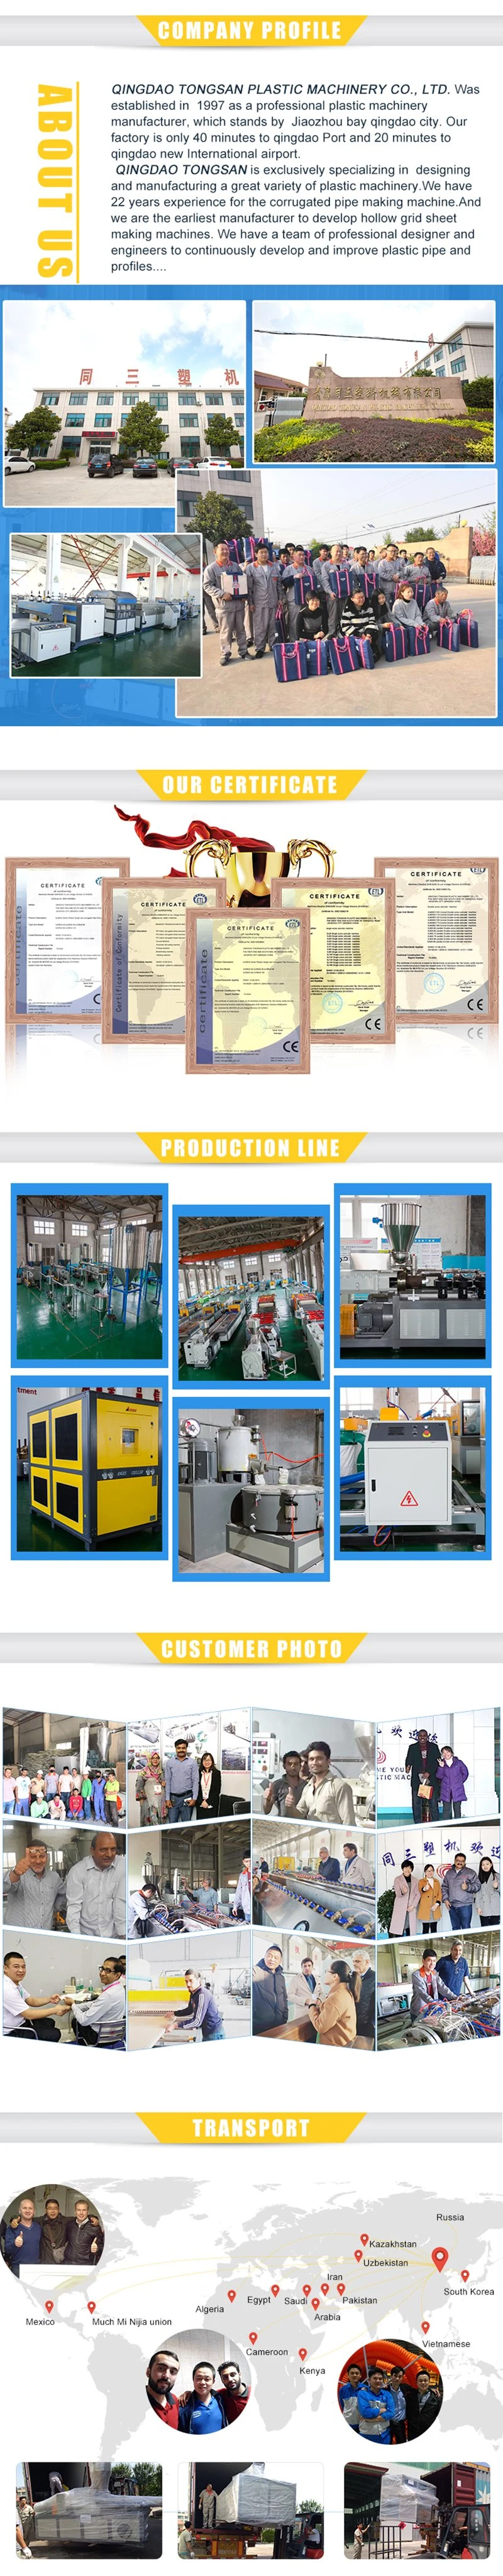 PVC WPC Door Frame Making Machines Manufacturer in China / Wood Plastic Composite Photo Frame Machine /WPC Window Profiles Extrusion Machine in China with Ce